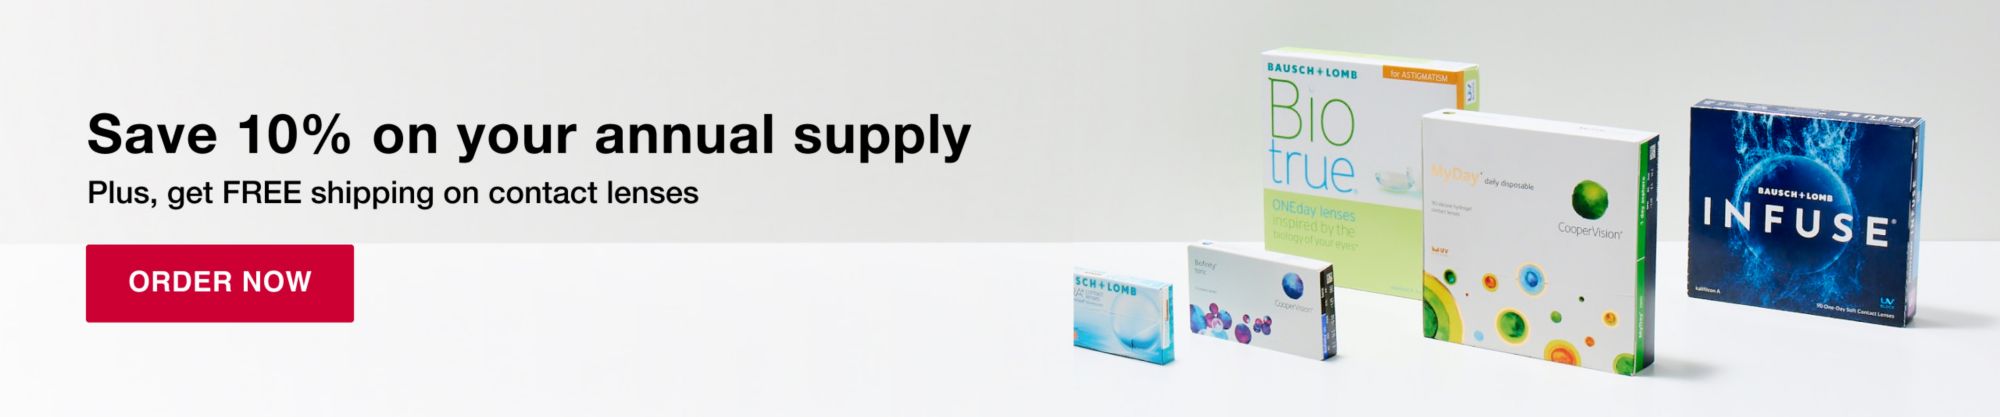 Save 10% on your annual supply. Plus, get FREE shipping on contact lenses. Click to order now